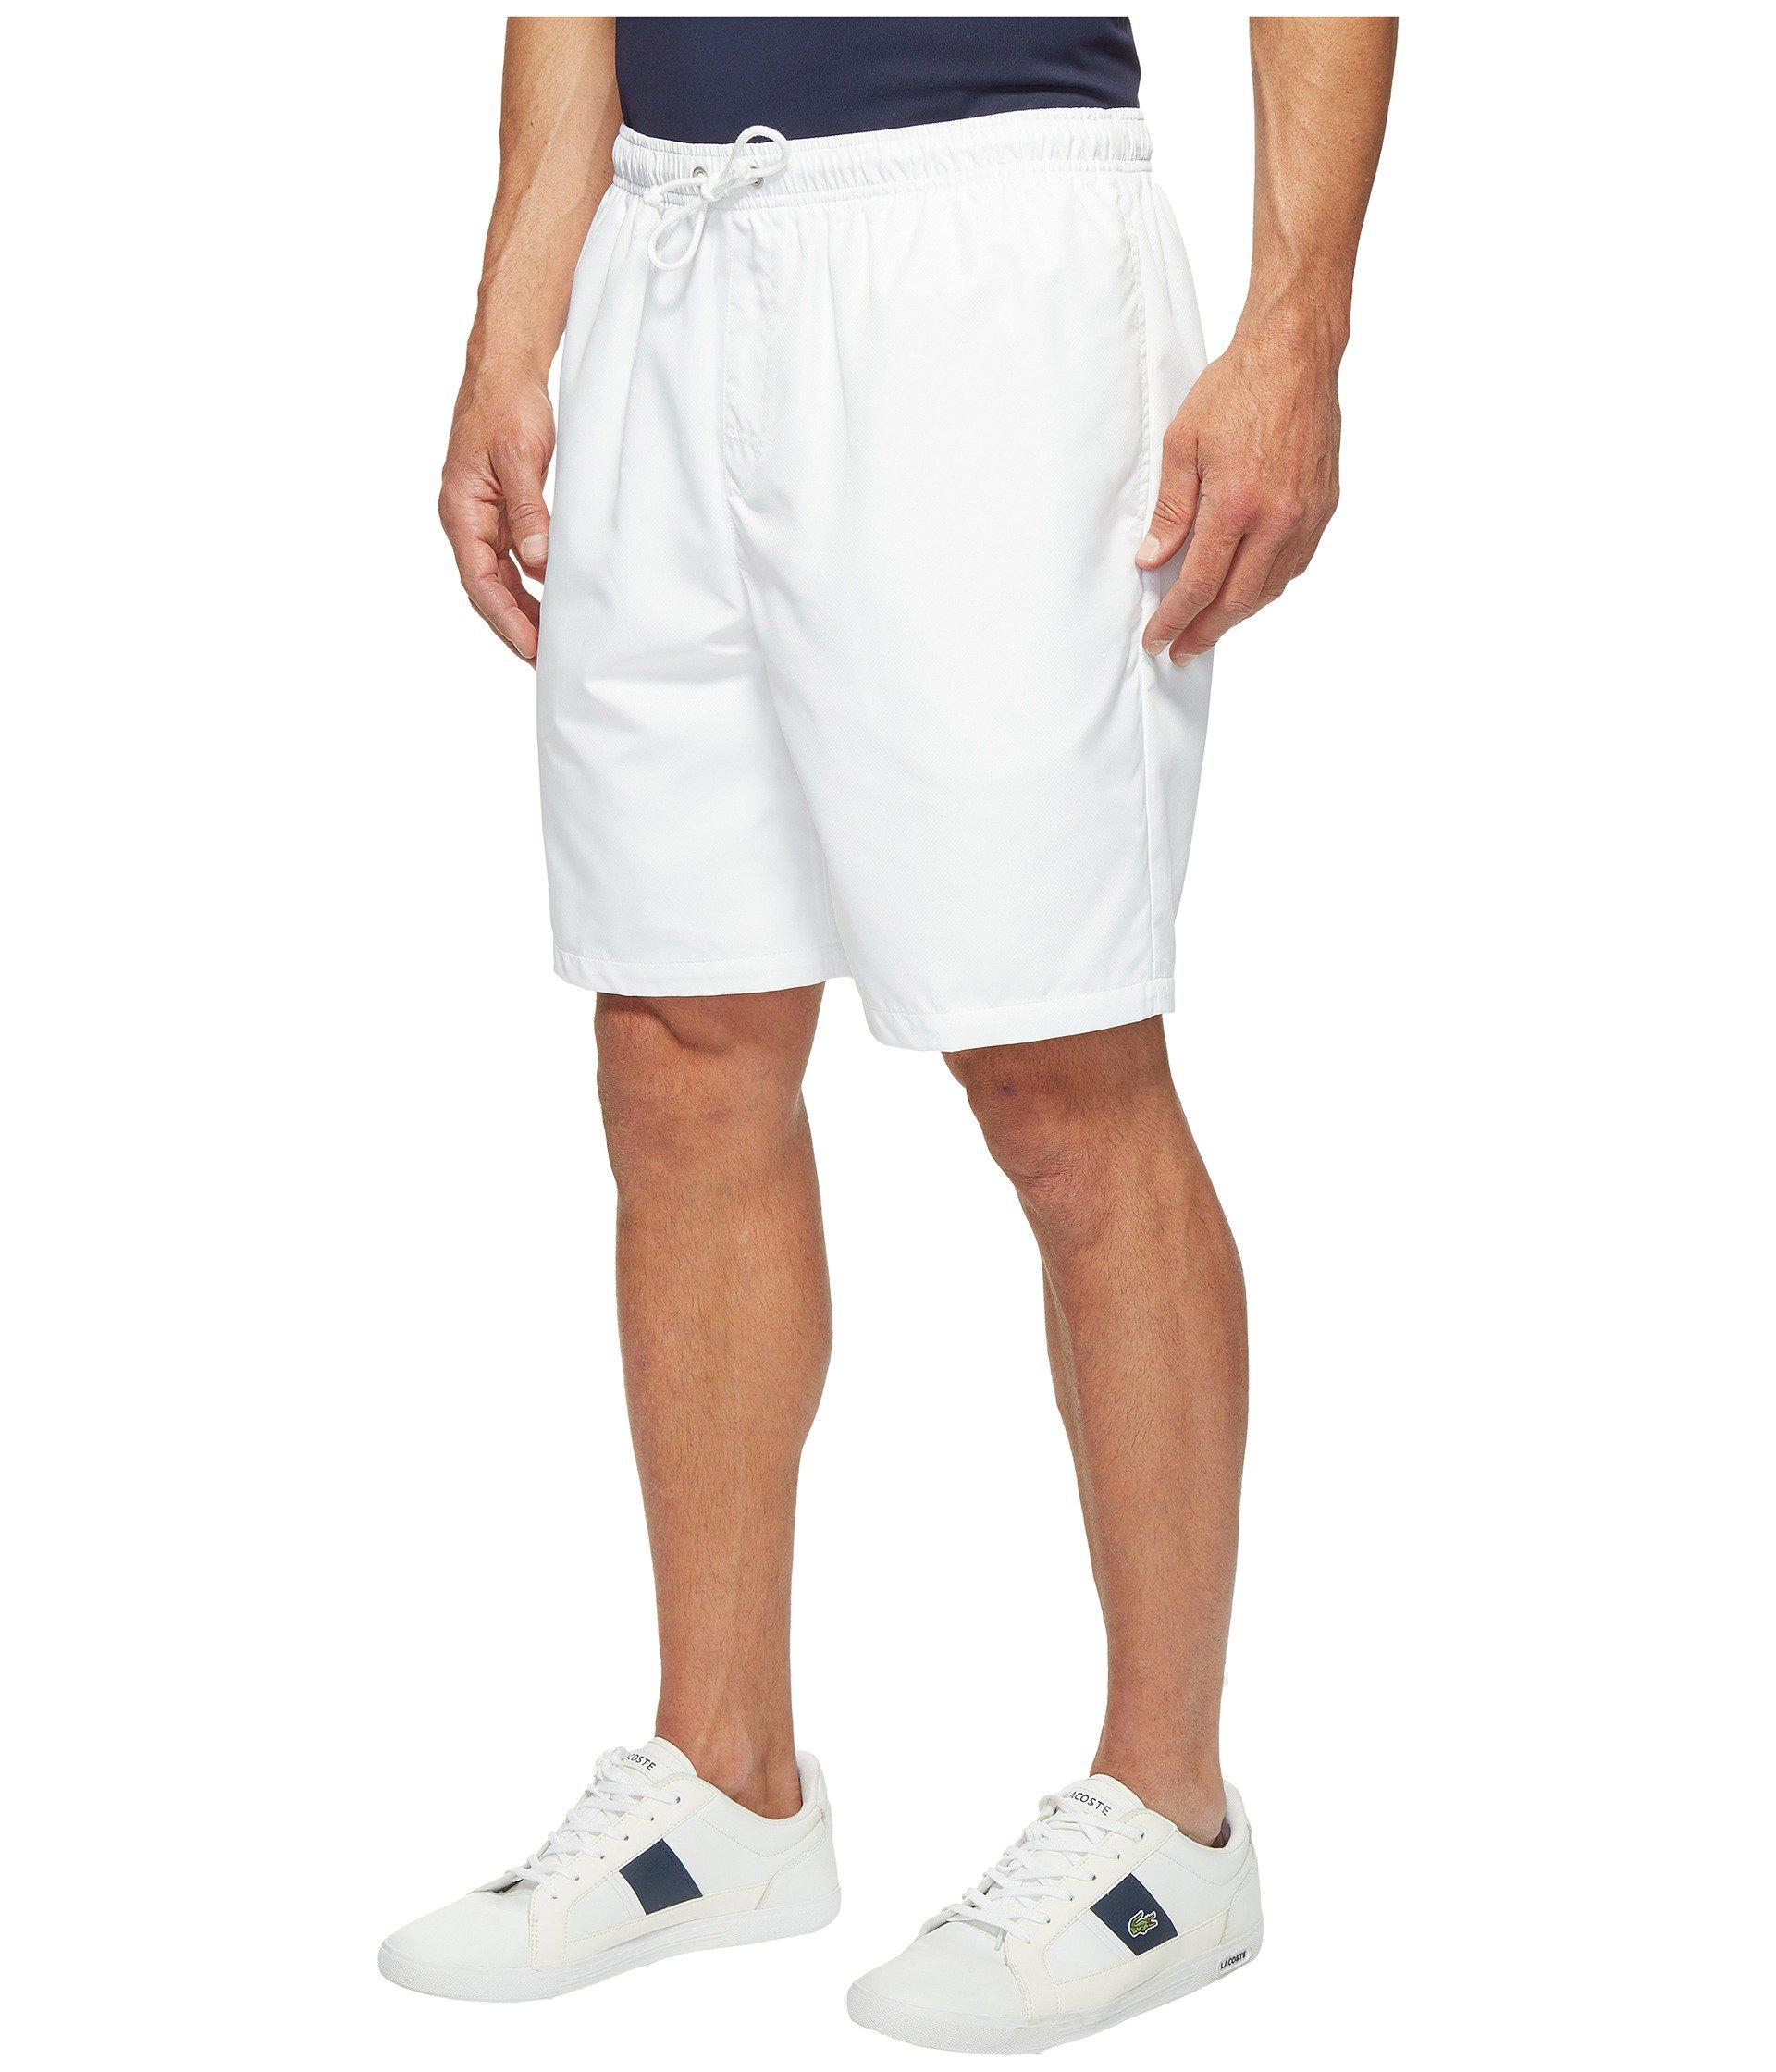 Lyst - Lacoste Sport Lined Tennis Shorts in White for Men